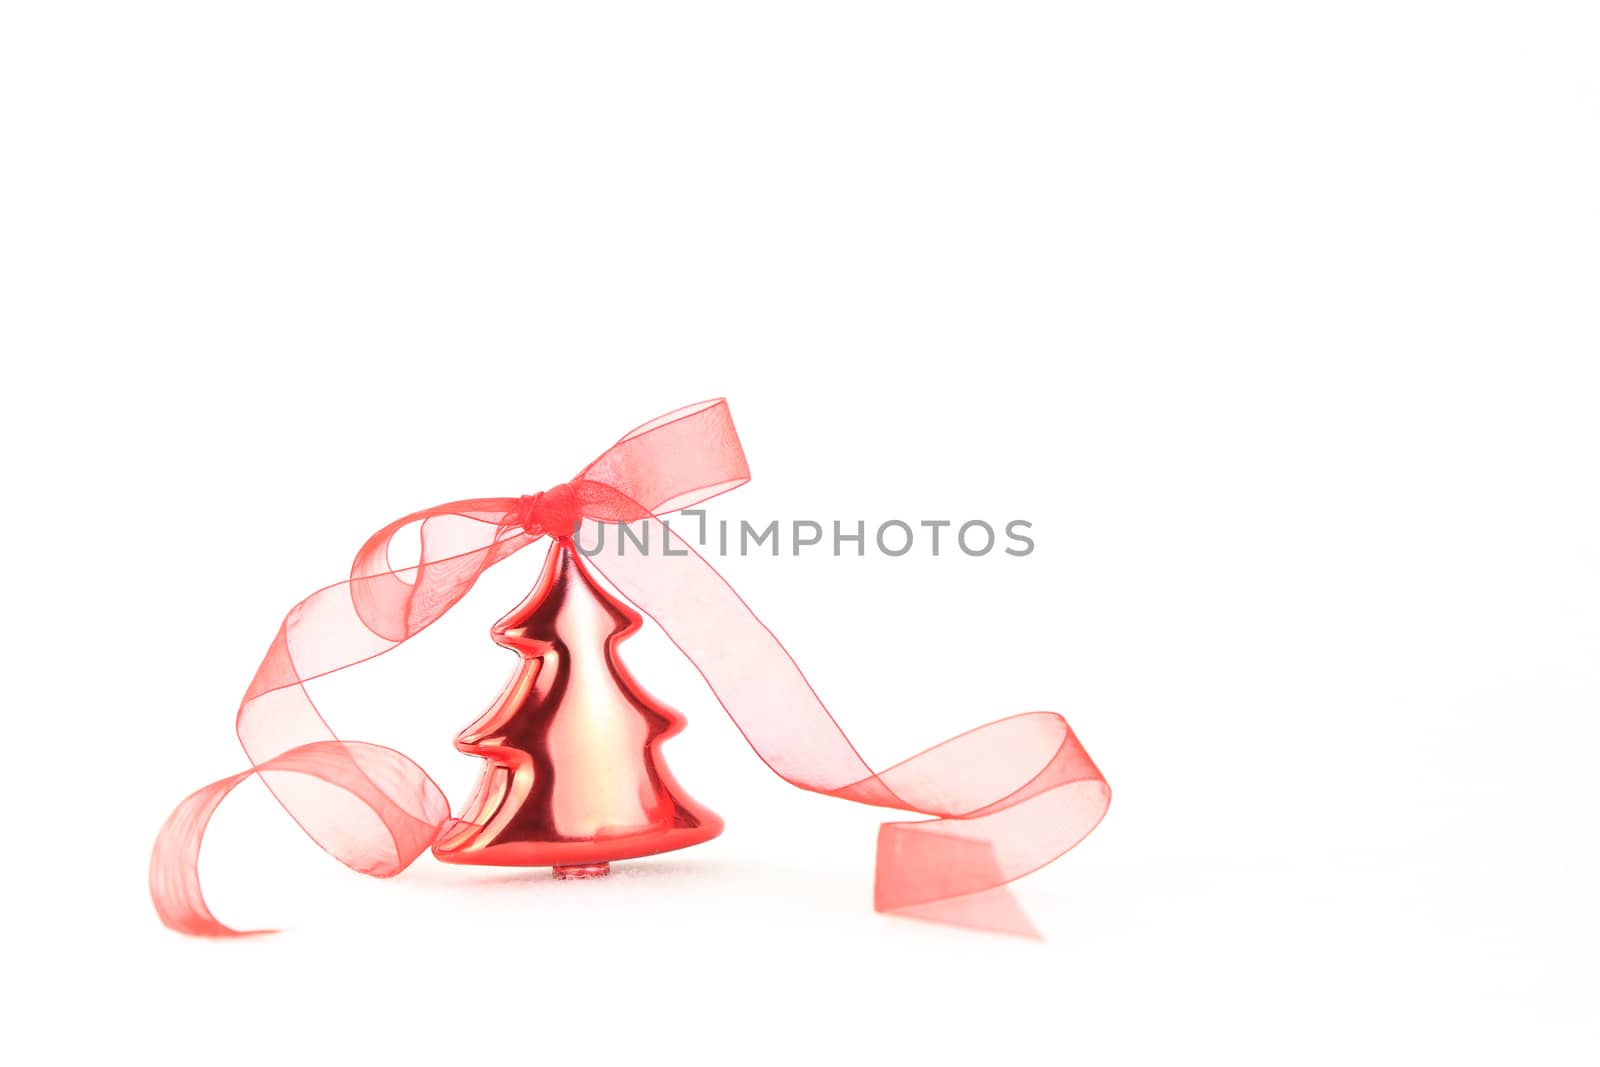 Isolated red Christmas tree bauble with red organza ribbon on white background